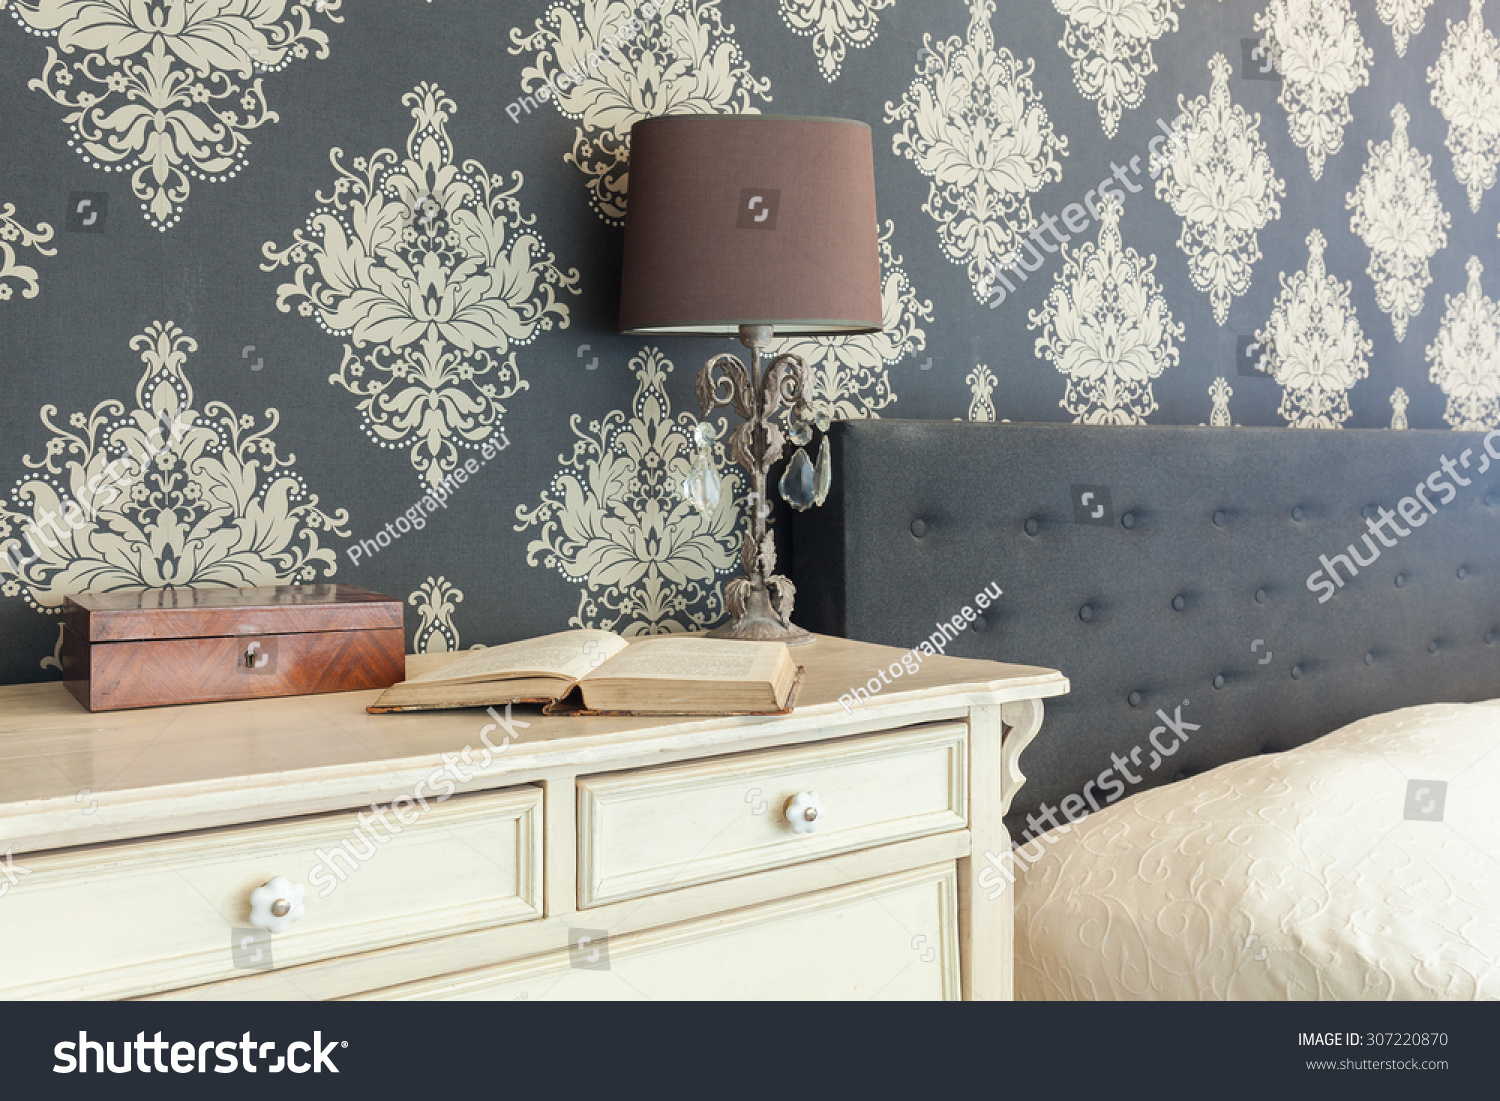 Close-up of patterned wallpaper in retro interior #307220870